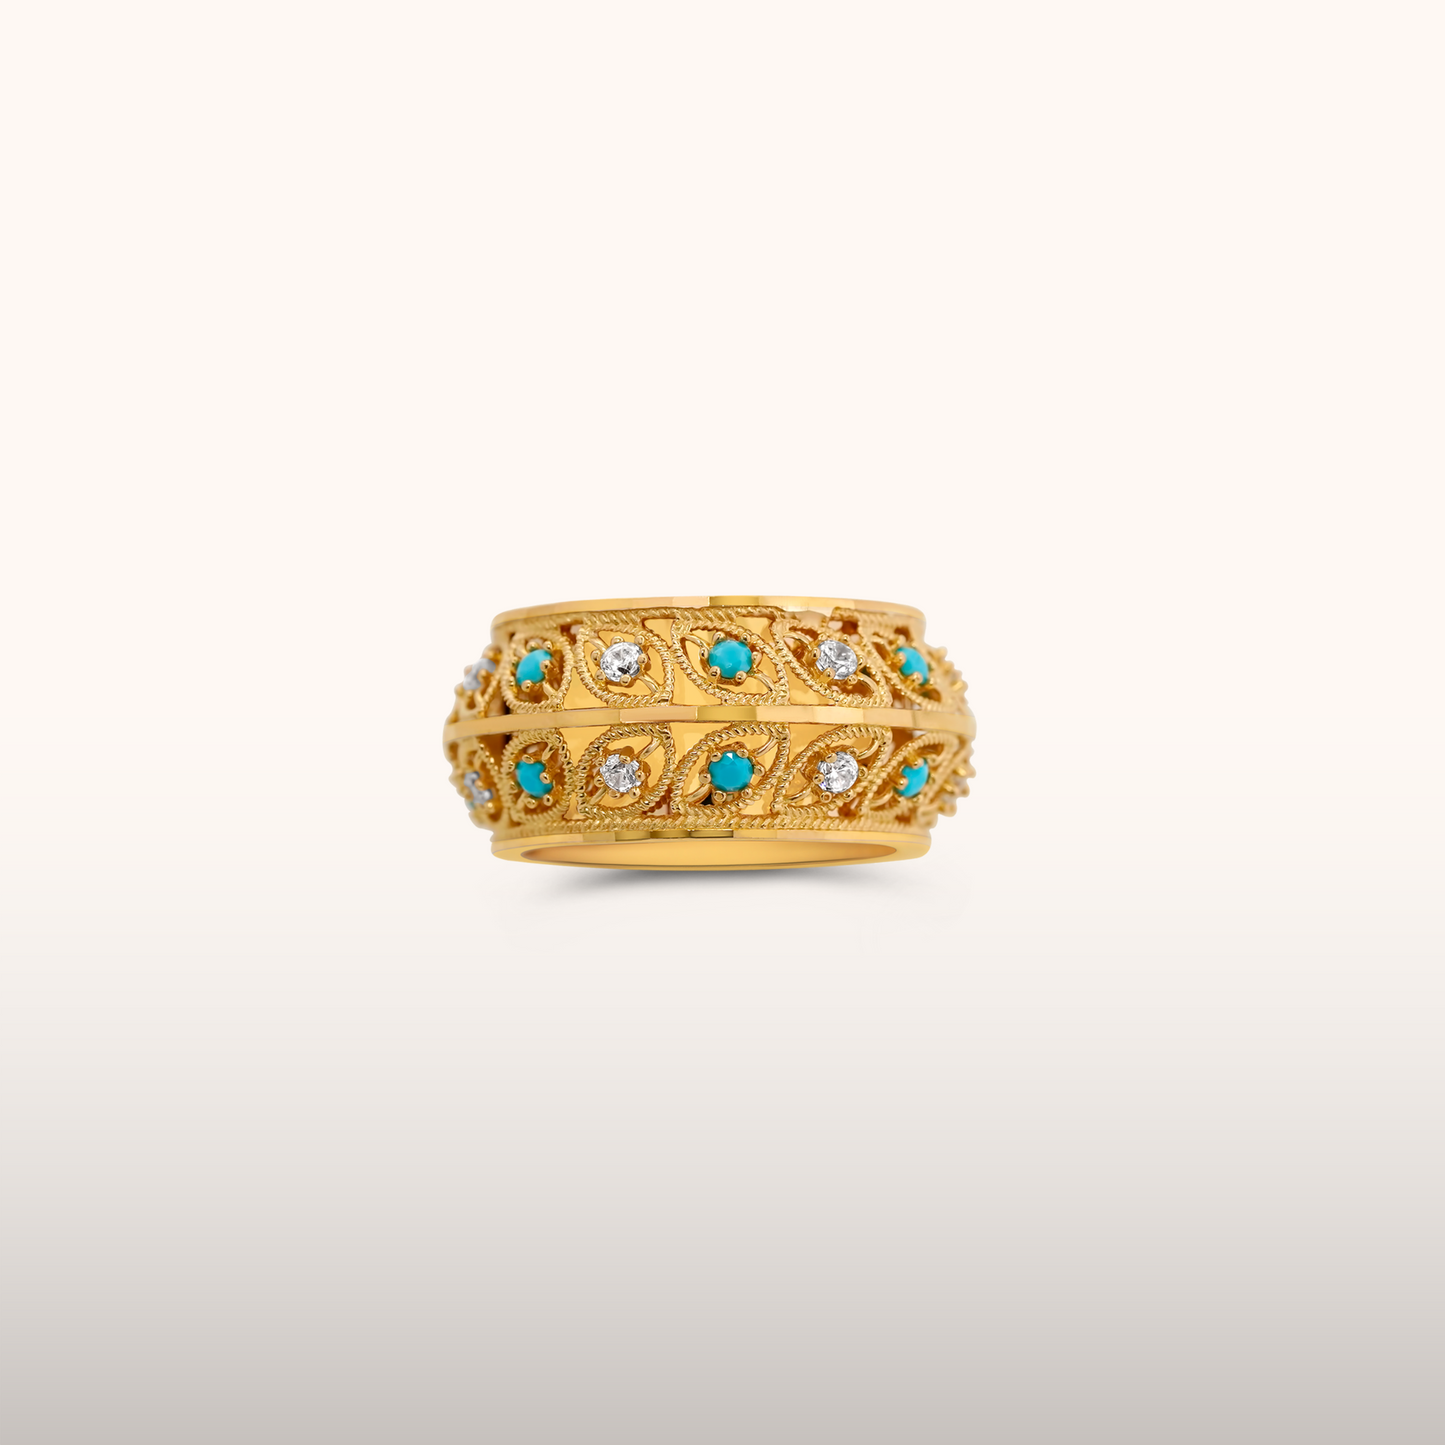 21k Bahraini Gold Ring with Turquoise Stones